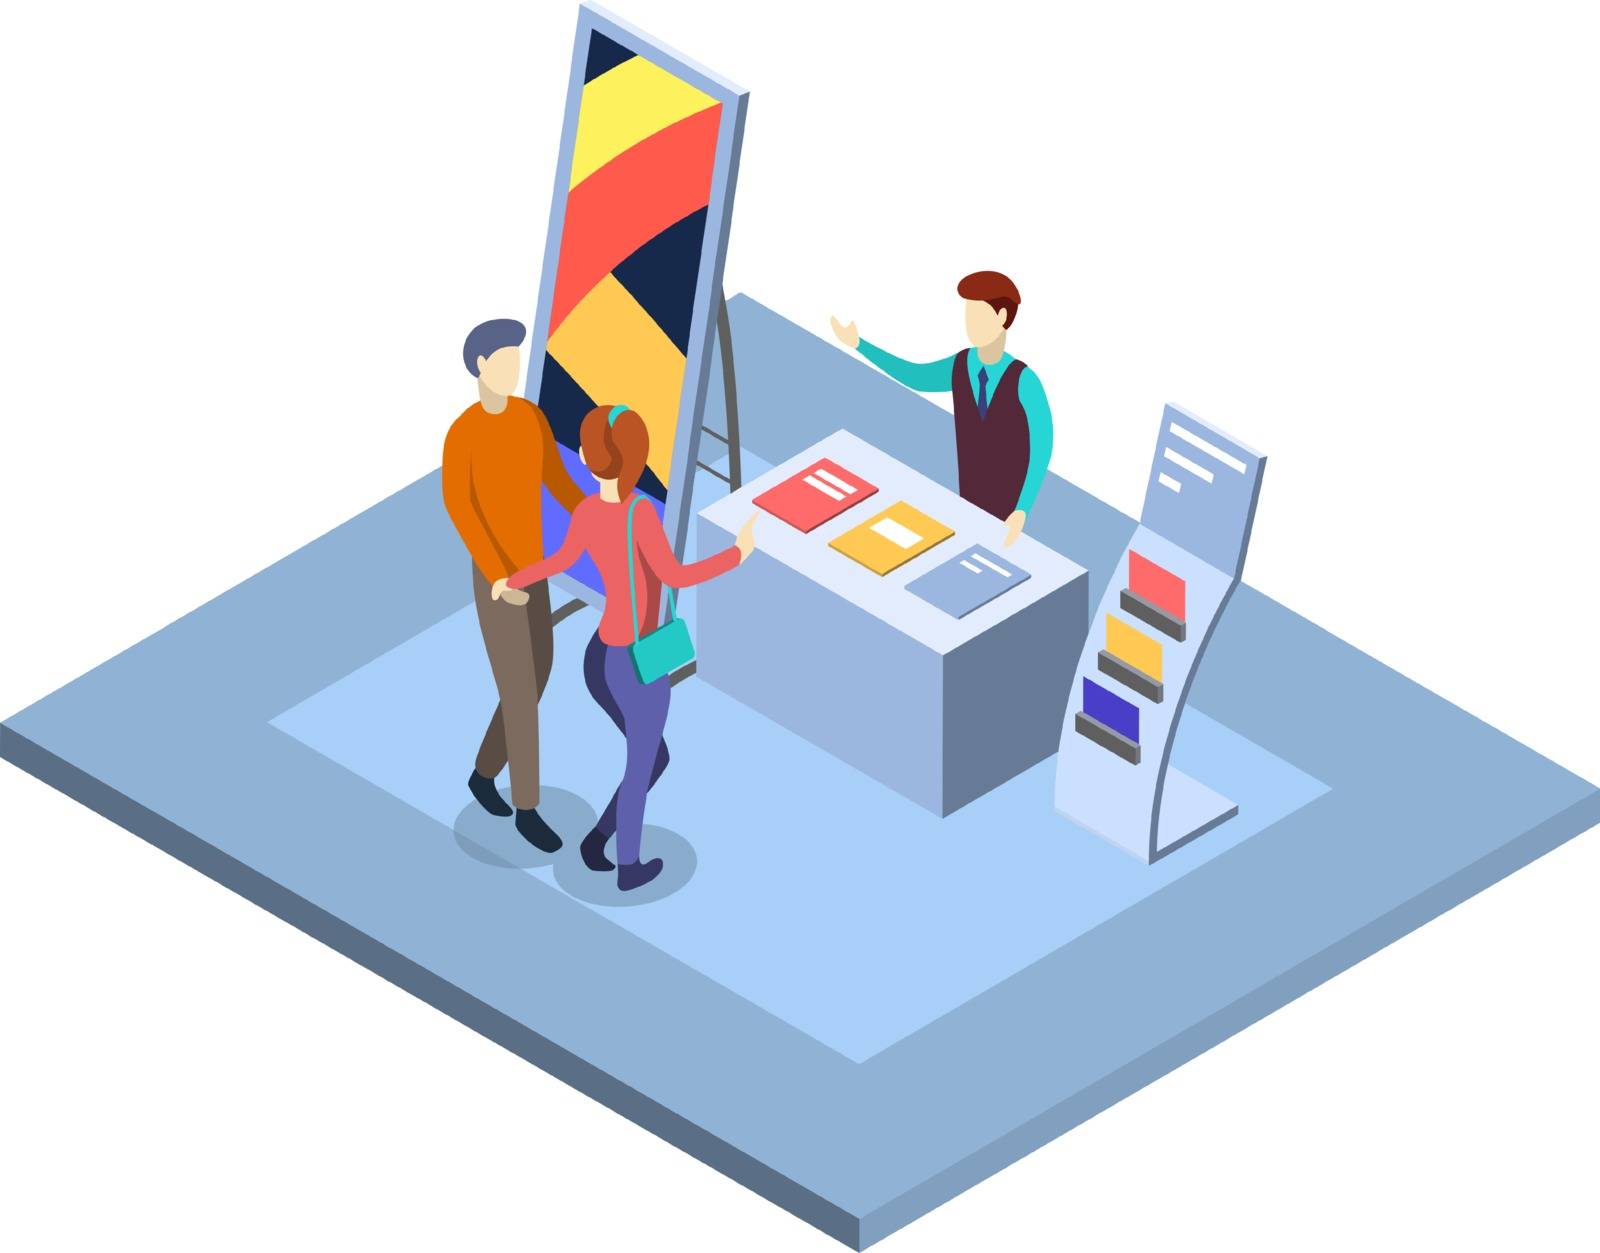 Trade show isometric vector illustration. Visitors at promotional expo stand with salesman, manager characters. Trade exhibition isolated 3d interior. Commercial tradeshow presentation by ntl